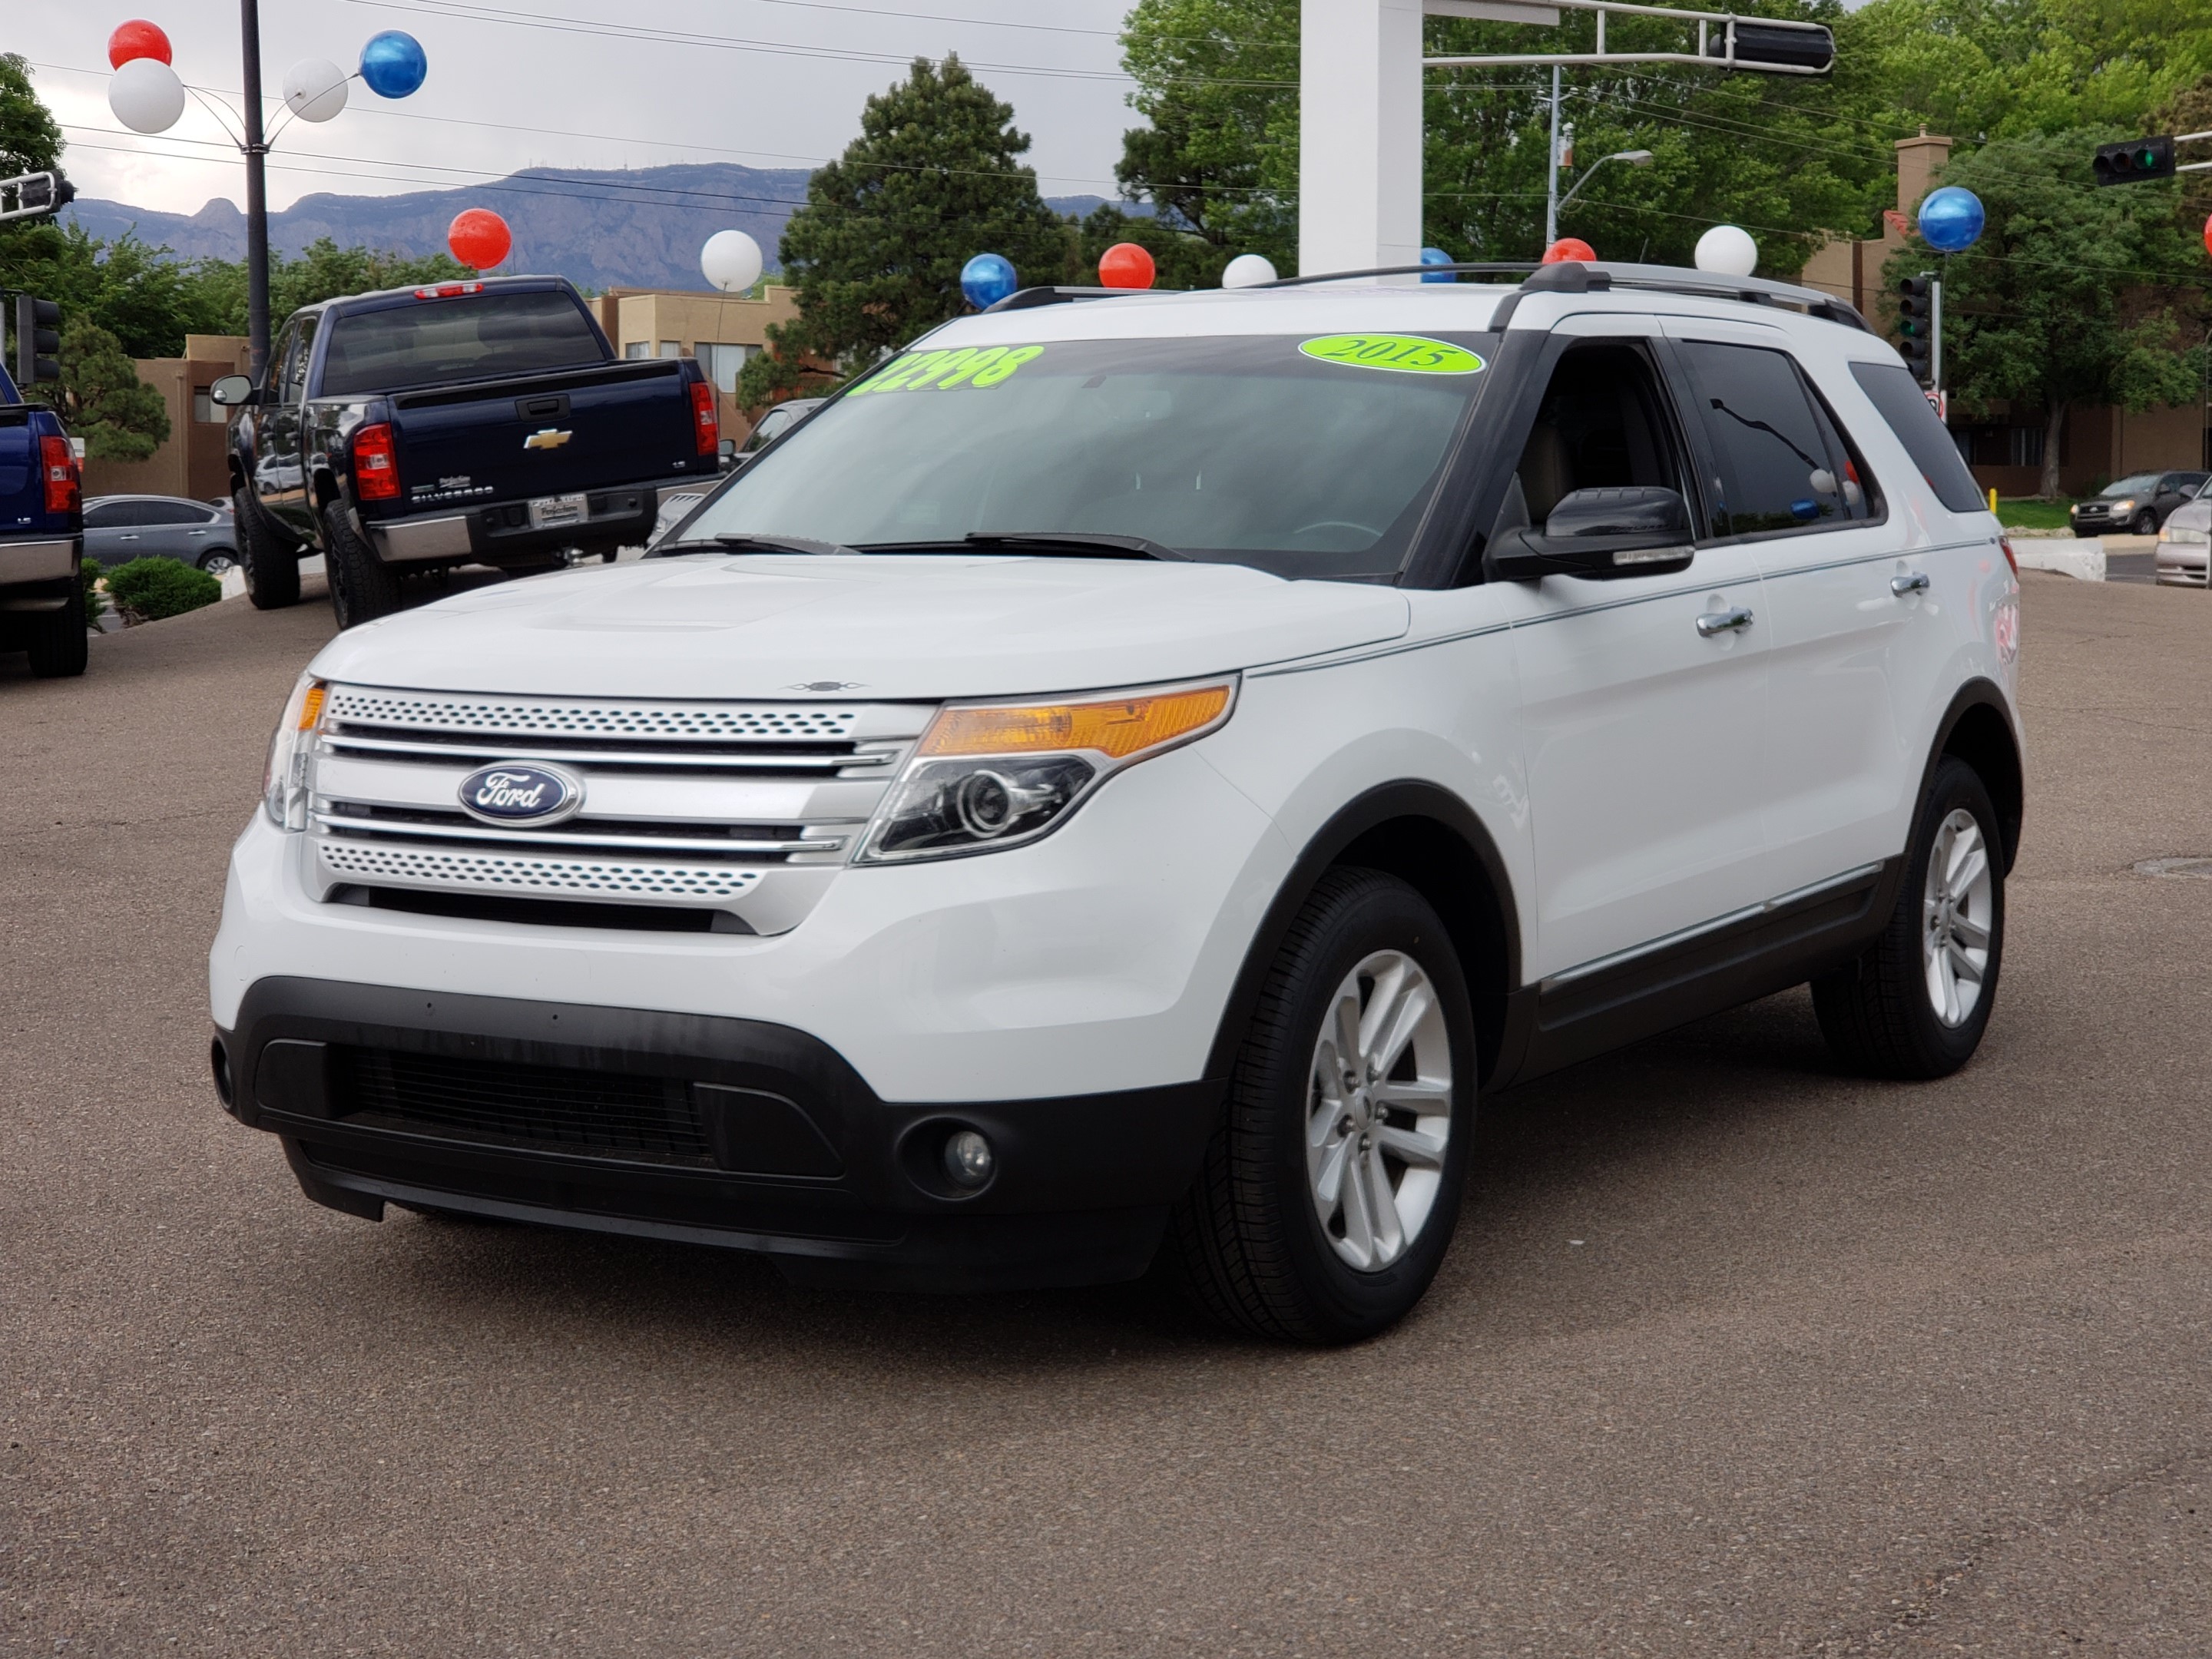 Pre-Owned 2015 Ford Explorer XLT Sport Utility in Albuquerque #AP0874T